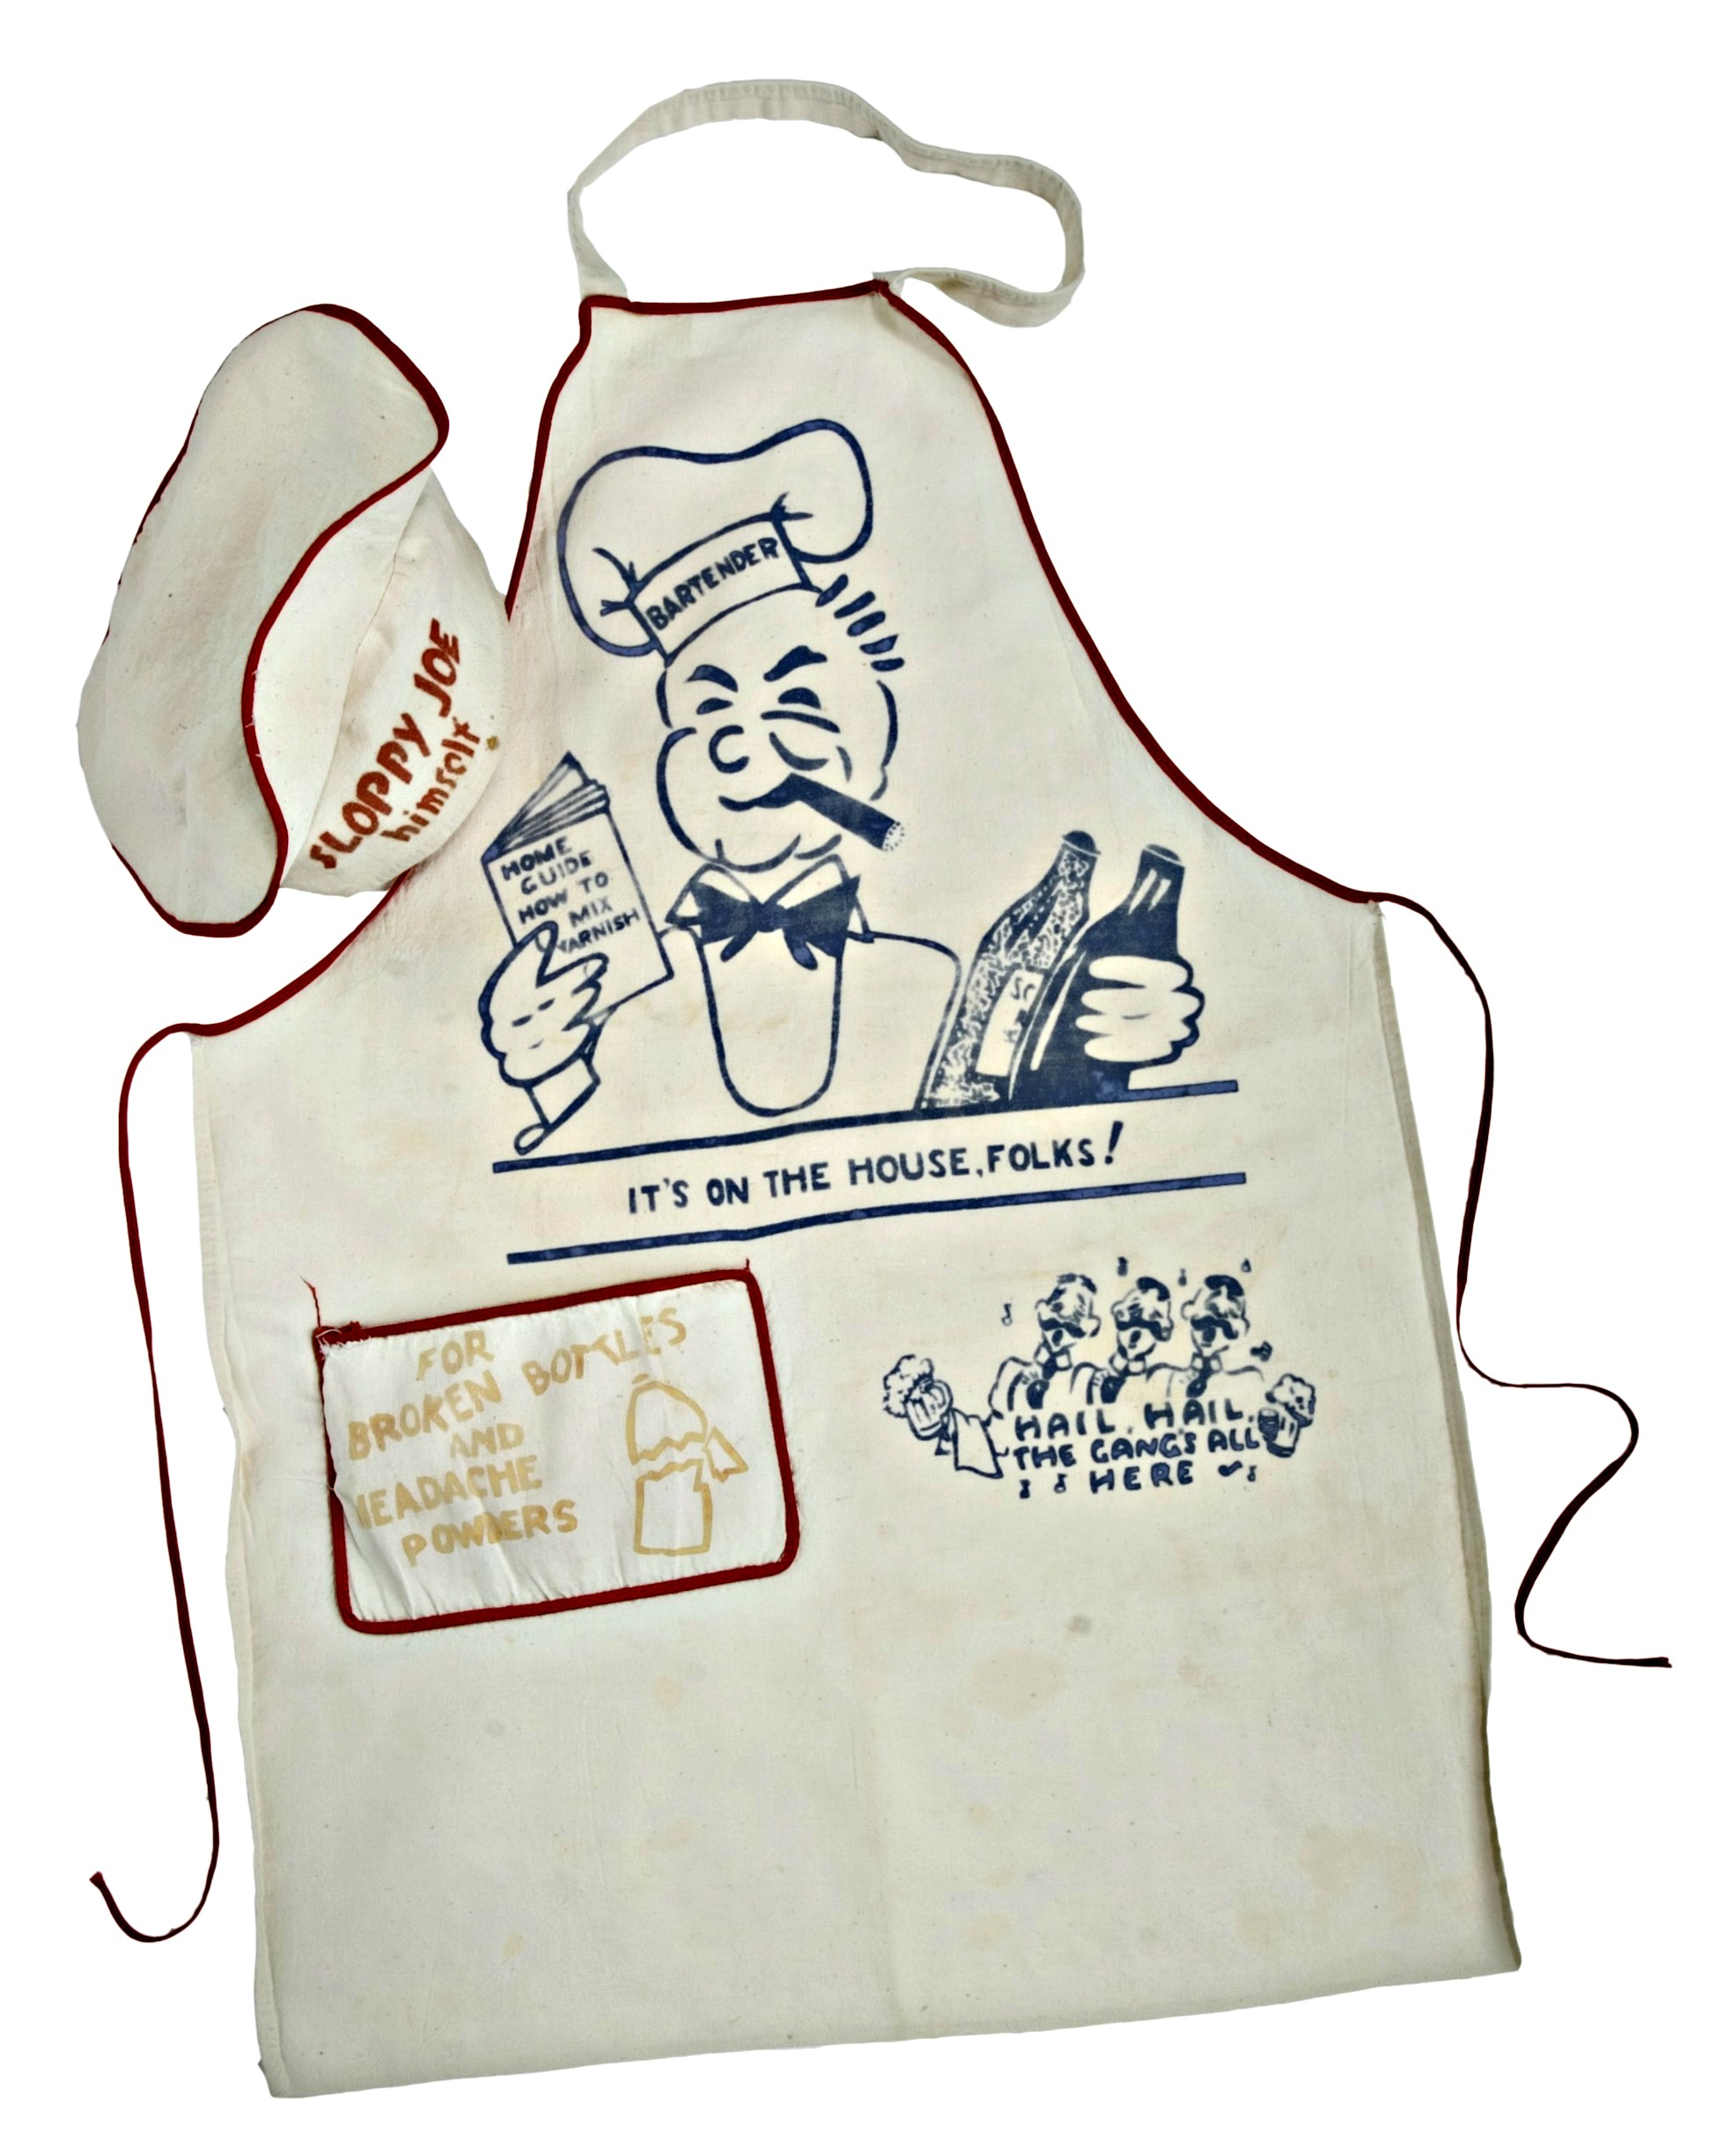 Photo of a white apron and matching chef-style hat. They are trimmed in red and there is a large cartoonish man on the front of the apron. This character wears a chef hat that says "bartender" and he is smoking a cigar. He holds 2 bottles in his left hand and a book in the right hand. The caption beneath reads, "It's on the house, folks!" The hat that is part of the ensemble says "Sloppy Joe himself" on the brow. 